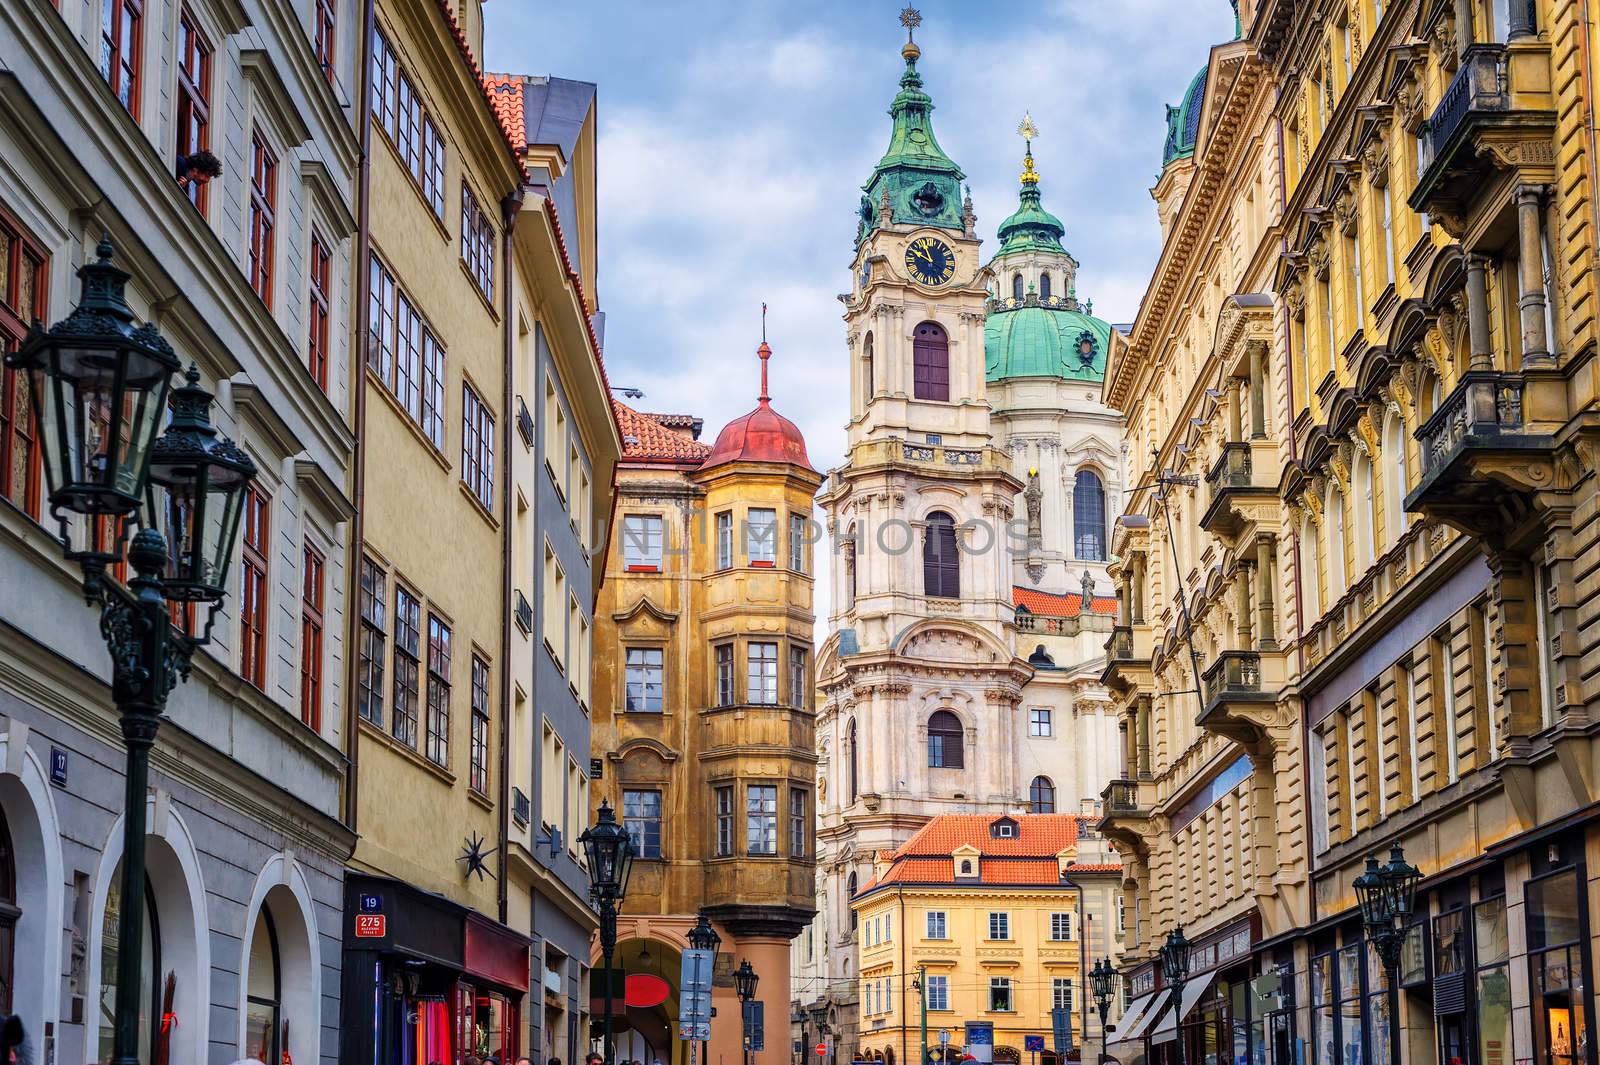 Historical baroque buildings in the center of Prague, Czech Repu by GlobePhotos